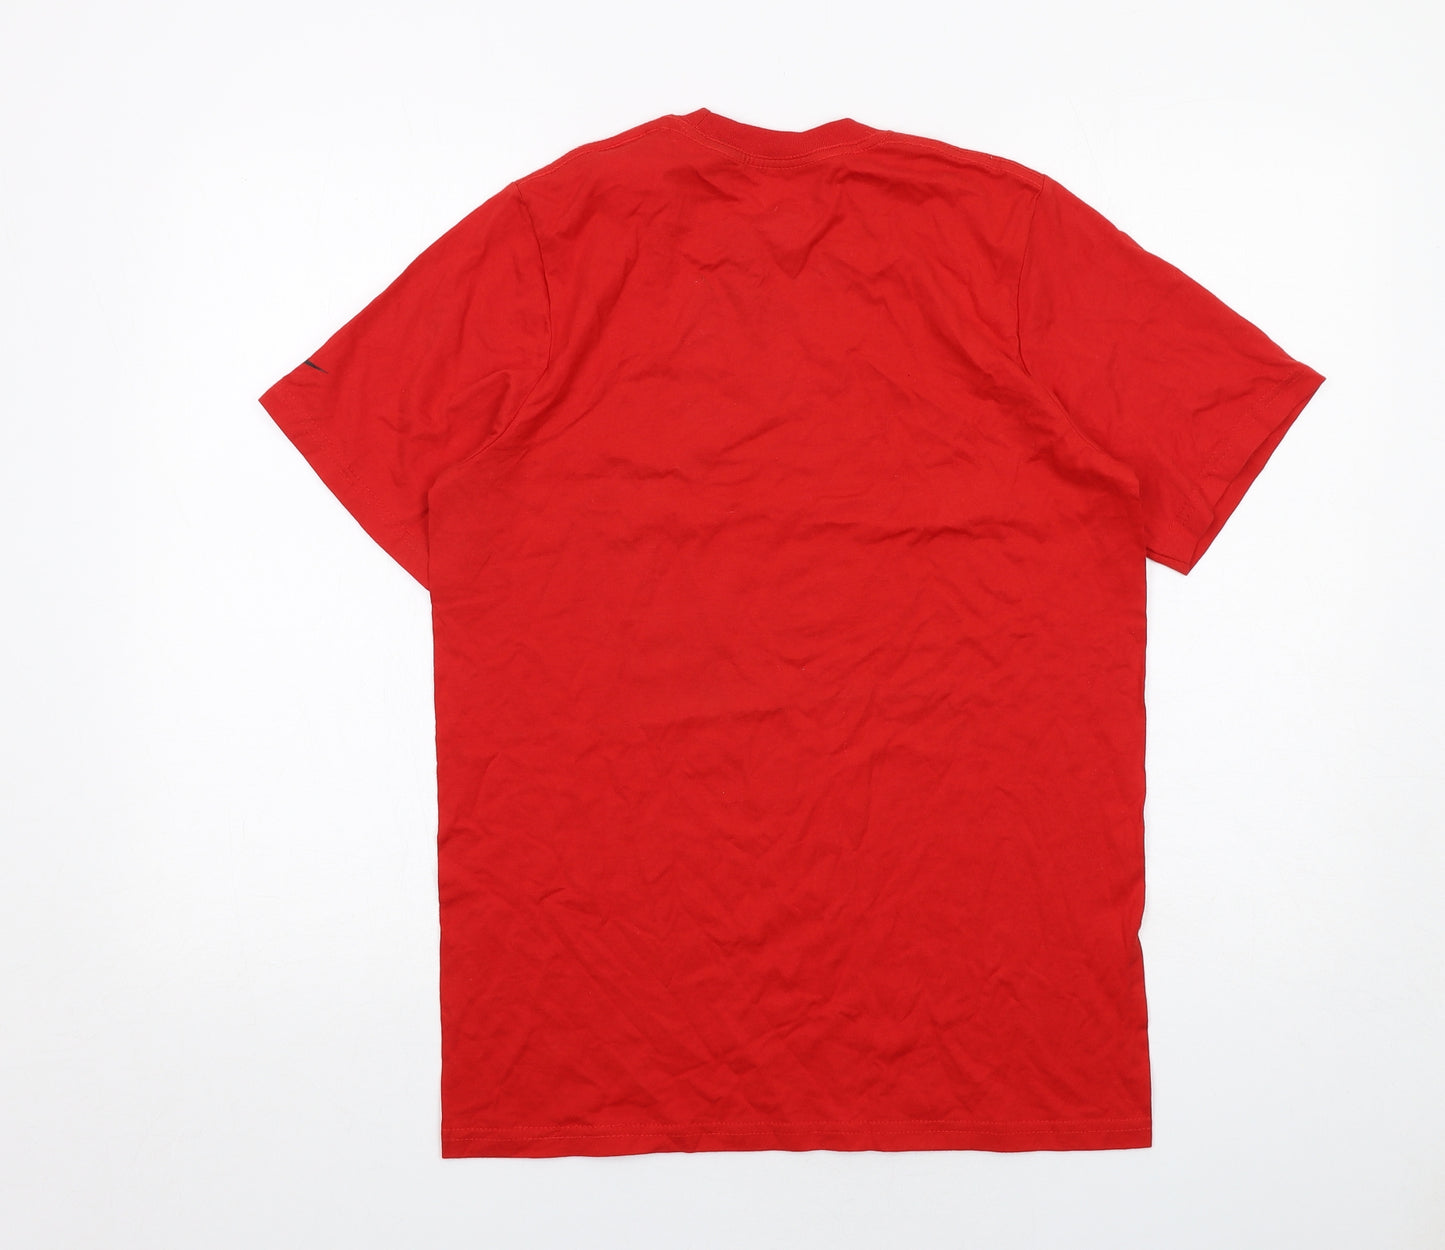 Nike Boys Red Cotton Basic T-Shirt Size 13-14 Years Round Neck Pullover - Air Nike